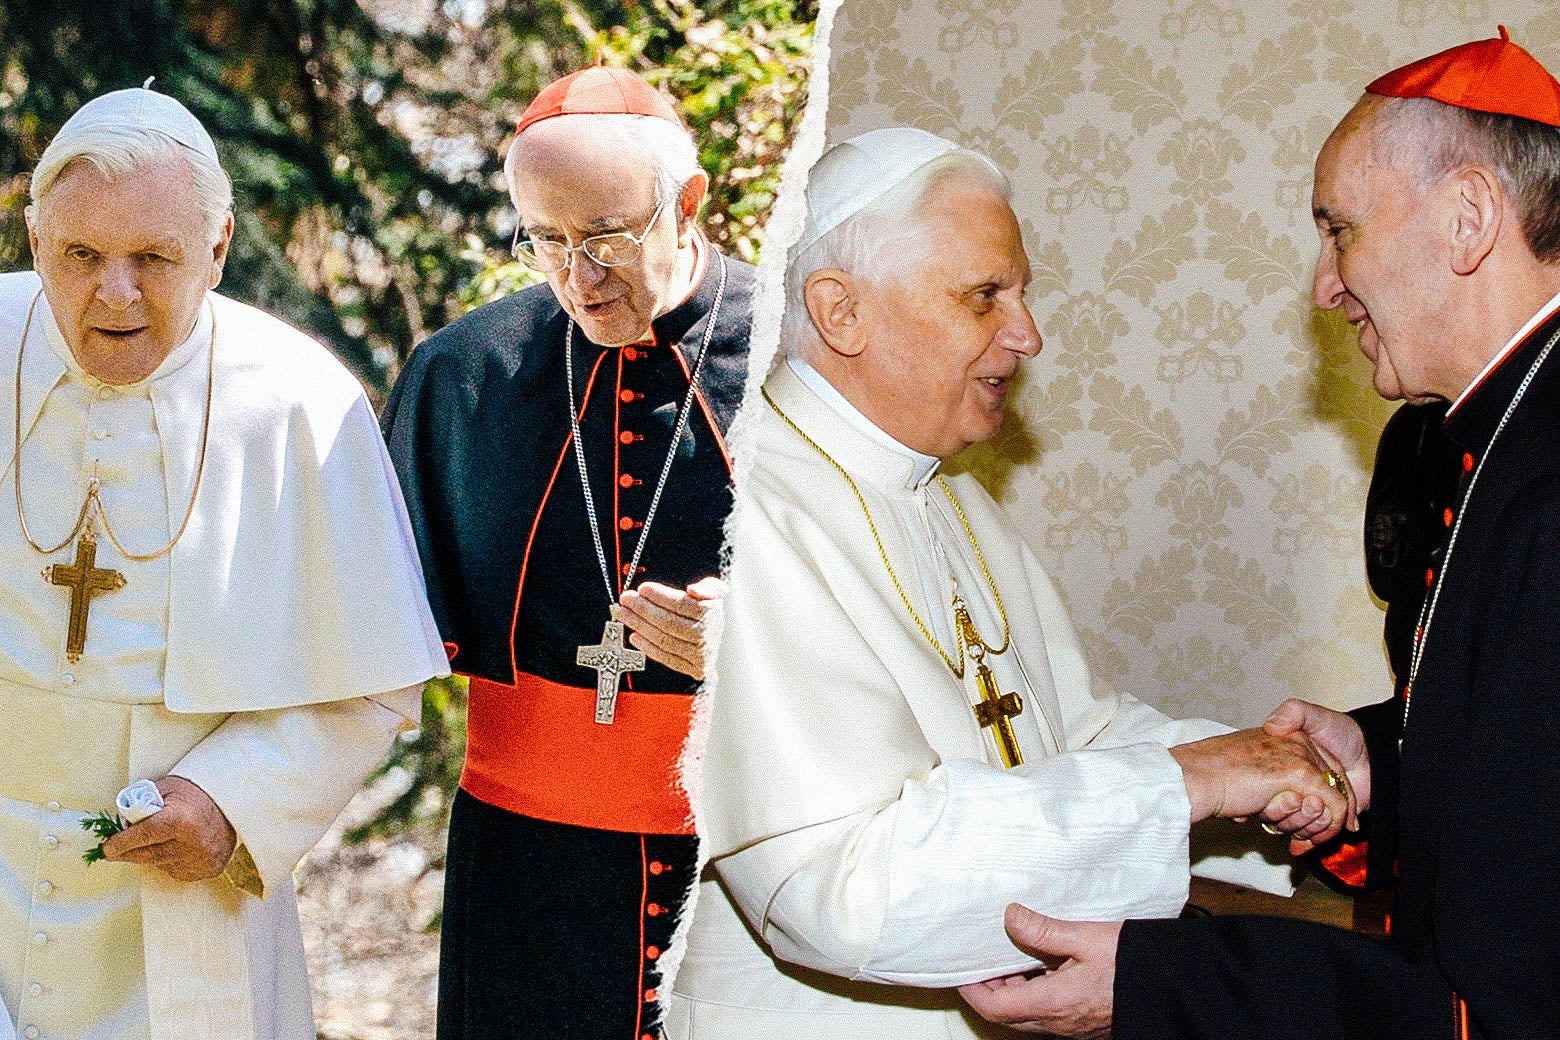 Hopkins and Pryce in The Two Popes; Pope Benedict XVI meets Cardinal Jorge Mario Bergoglio at the Vatican in 2007.